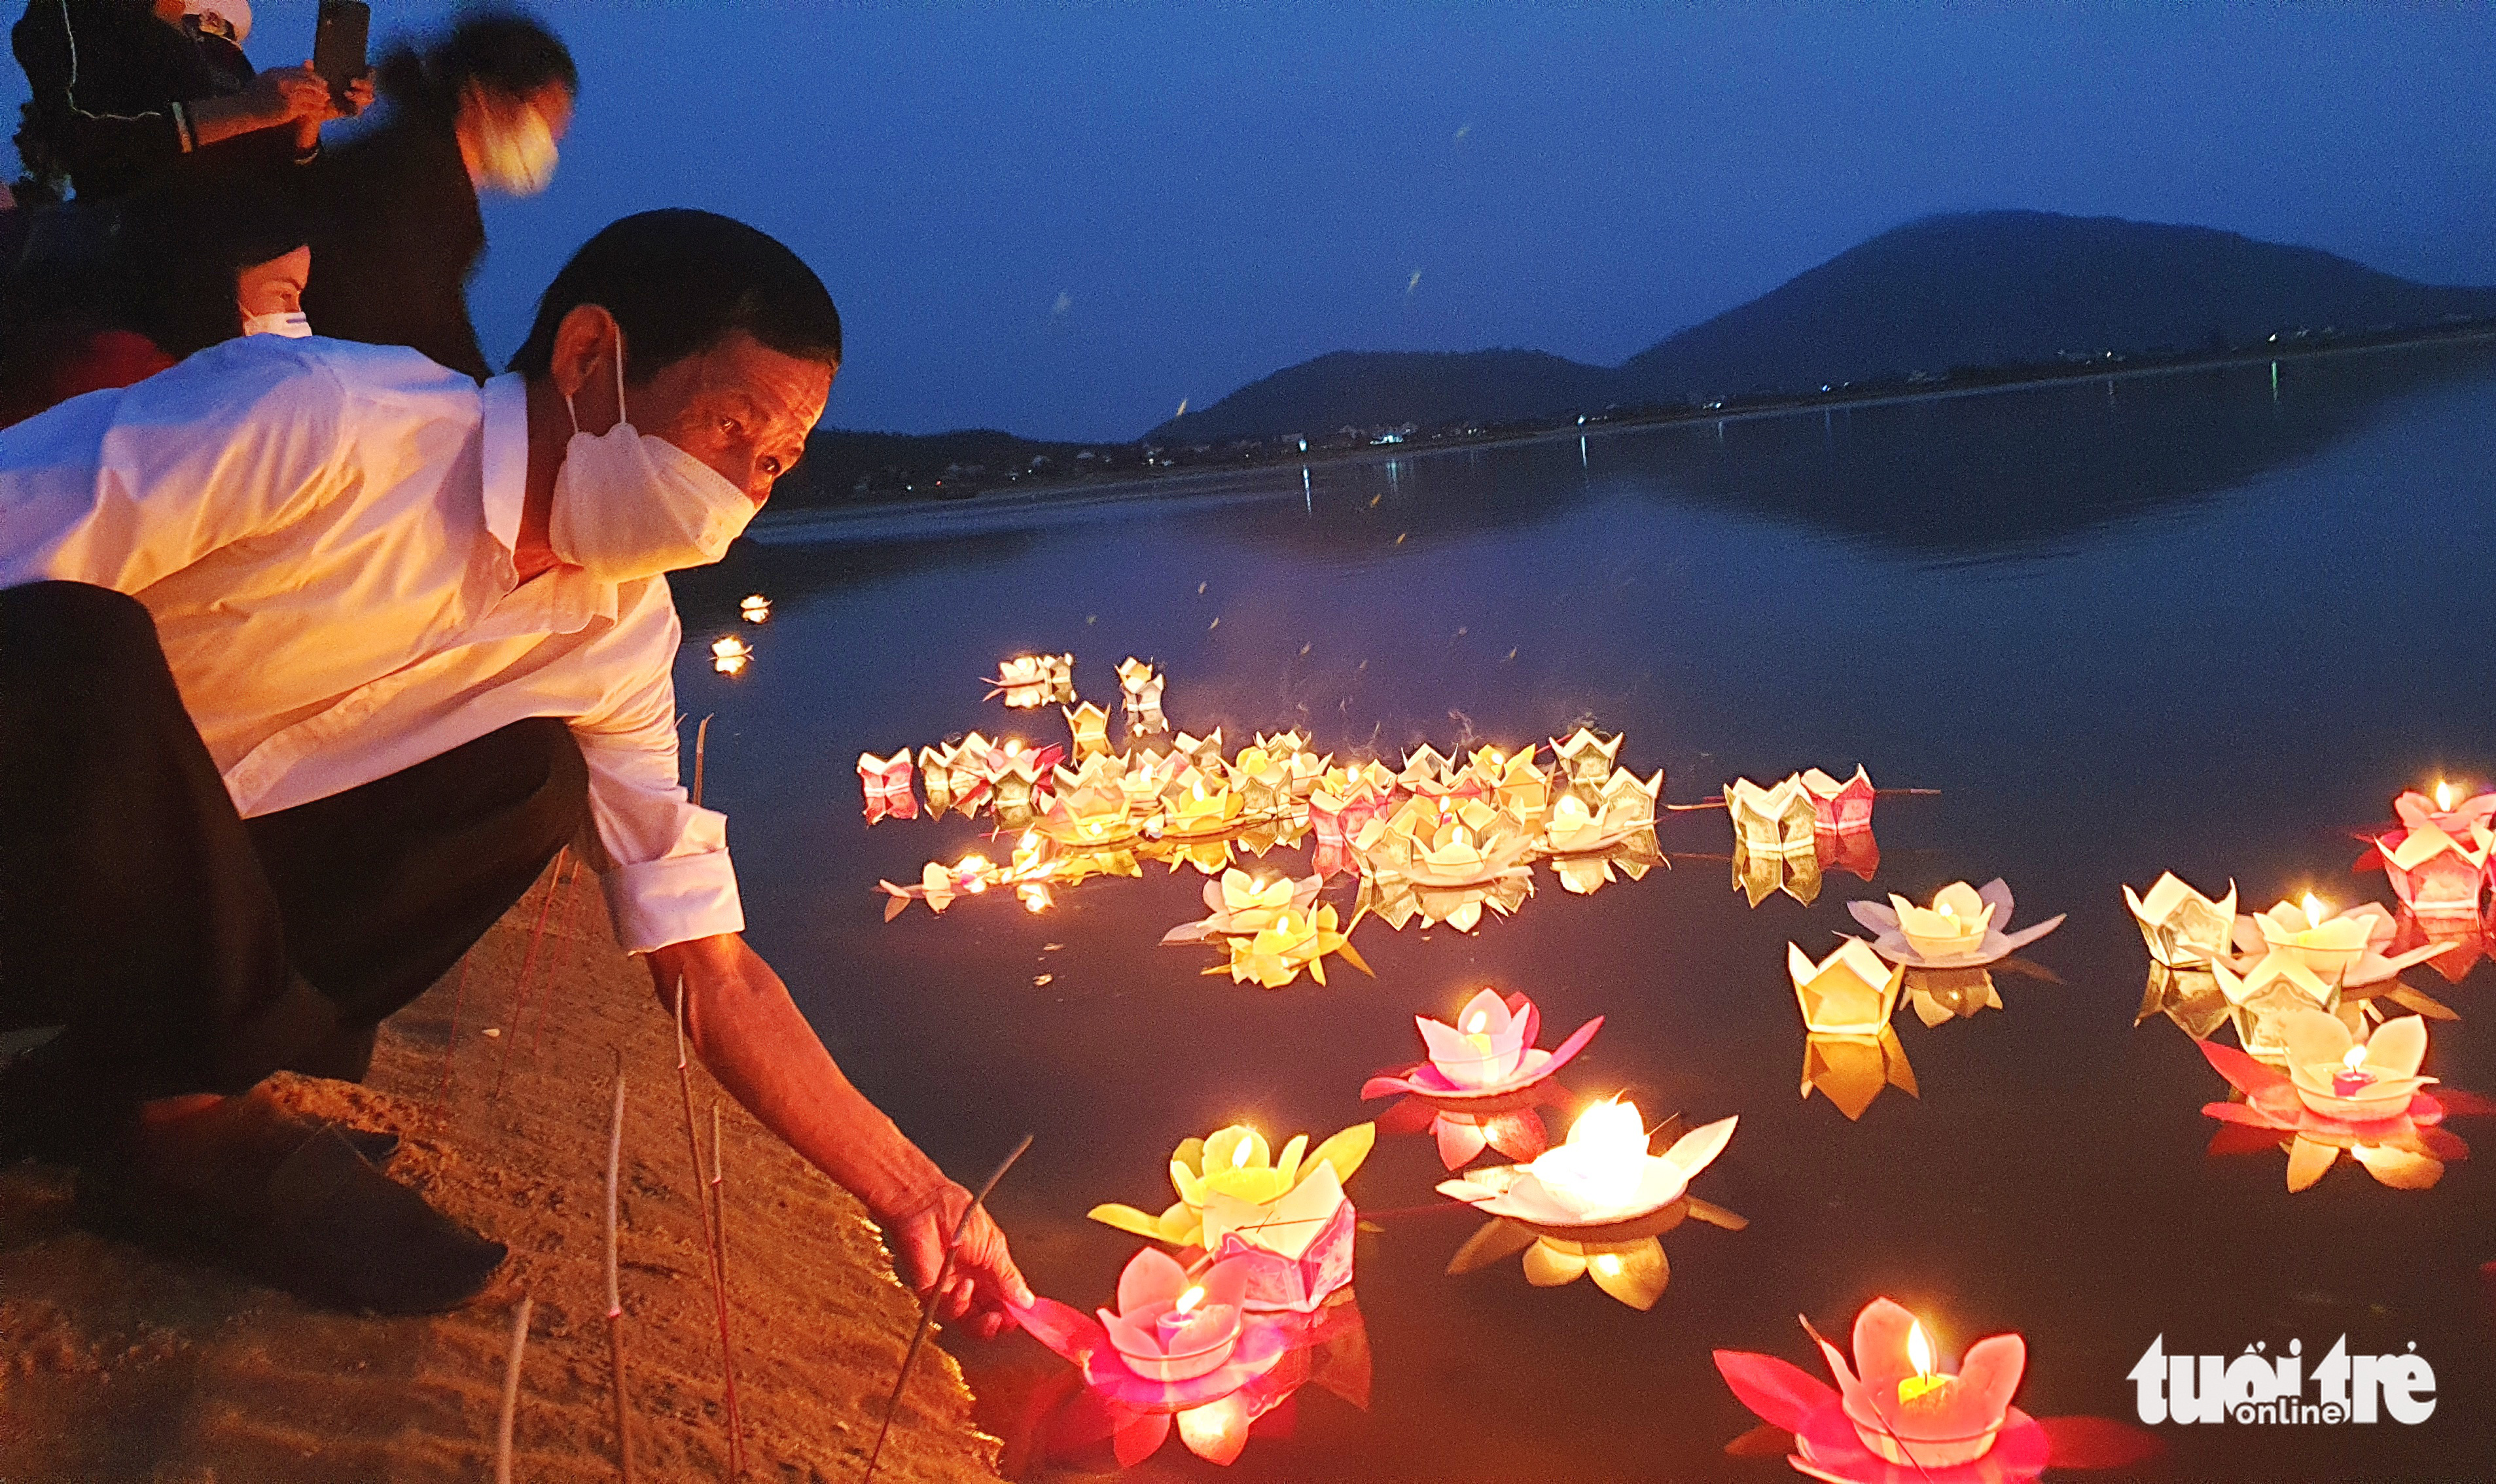 People release lanterns at a beach in Cam Nhuong Commune, Ha Tinh Province to commemorate the fallen soldiers, March 13, 2022. Photo: Quoc Nam / Tuoi Tre